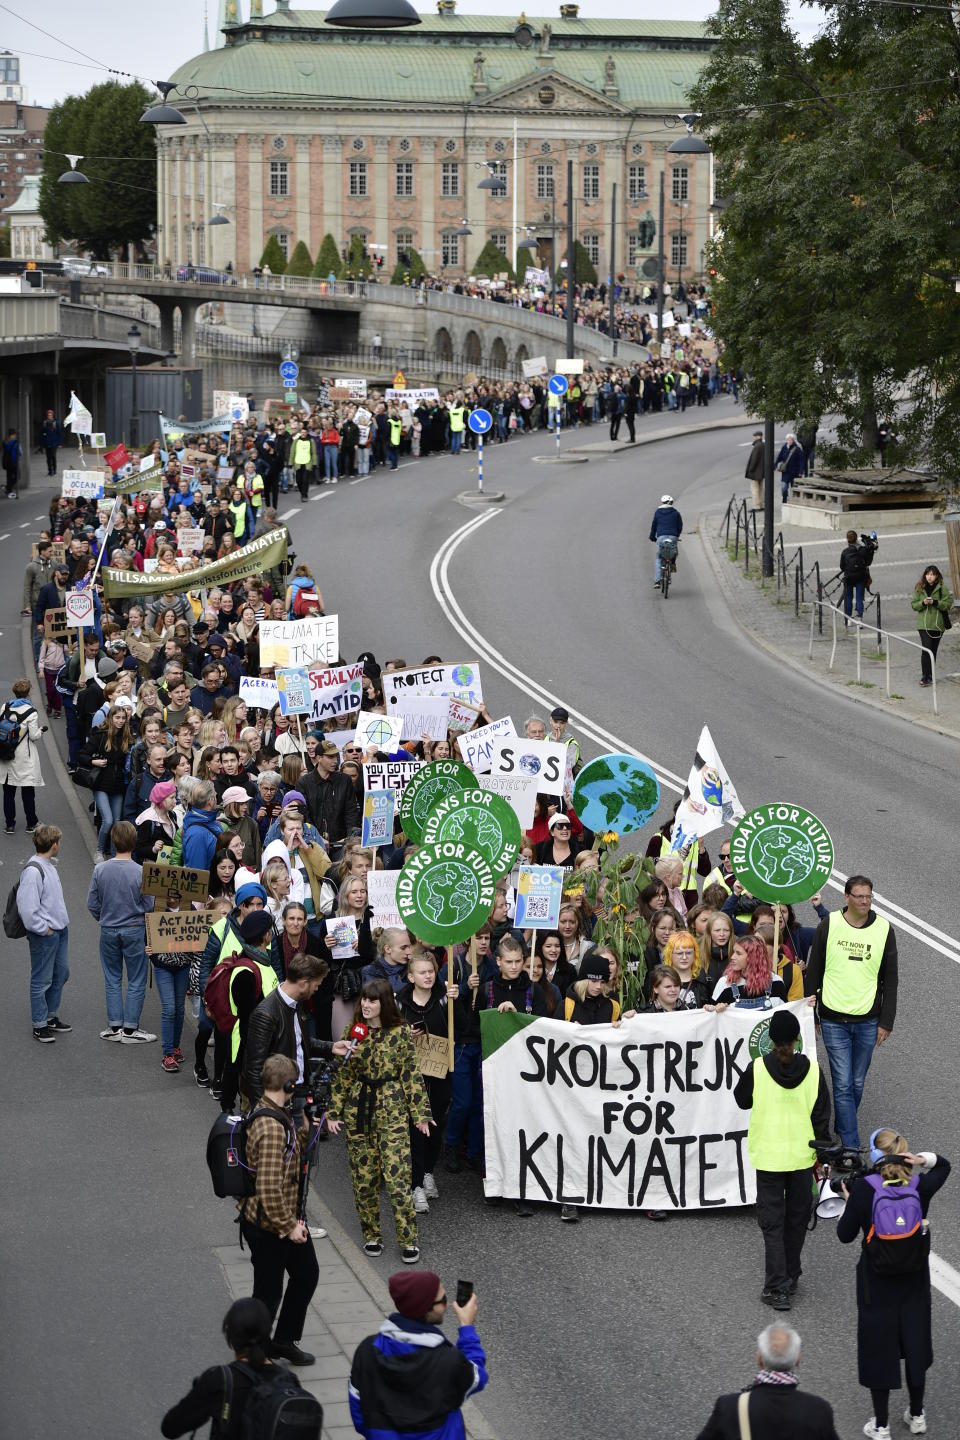 Climate protesters demonstrate in central Stockholm, Sweden, Friday, Sept. 20, 2019. Protesters around the world joined rallies on Friday as a day of worldwide demonstrations calling for action against climate change began ahead of a U.N. summit in New York. (Stina Stjernkvist/TT via AP)